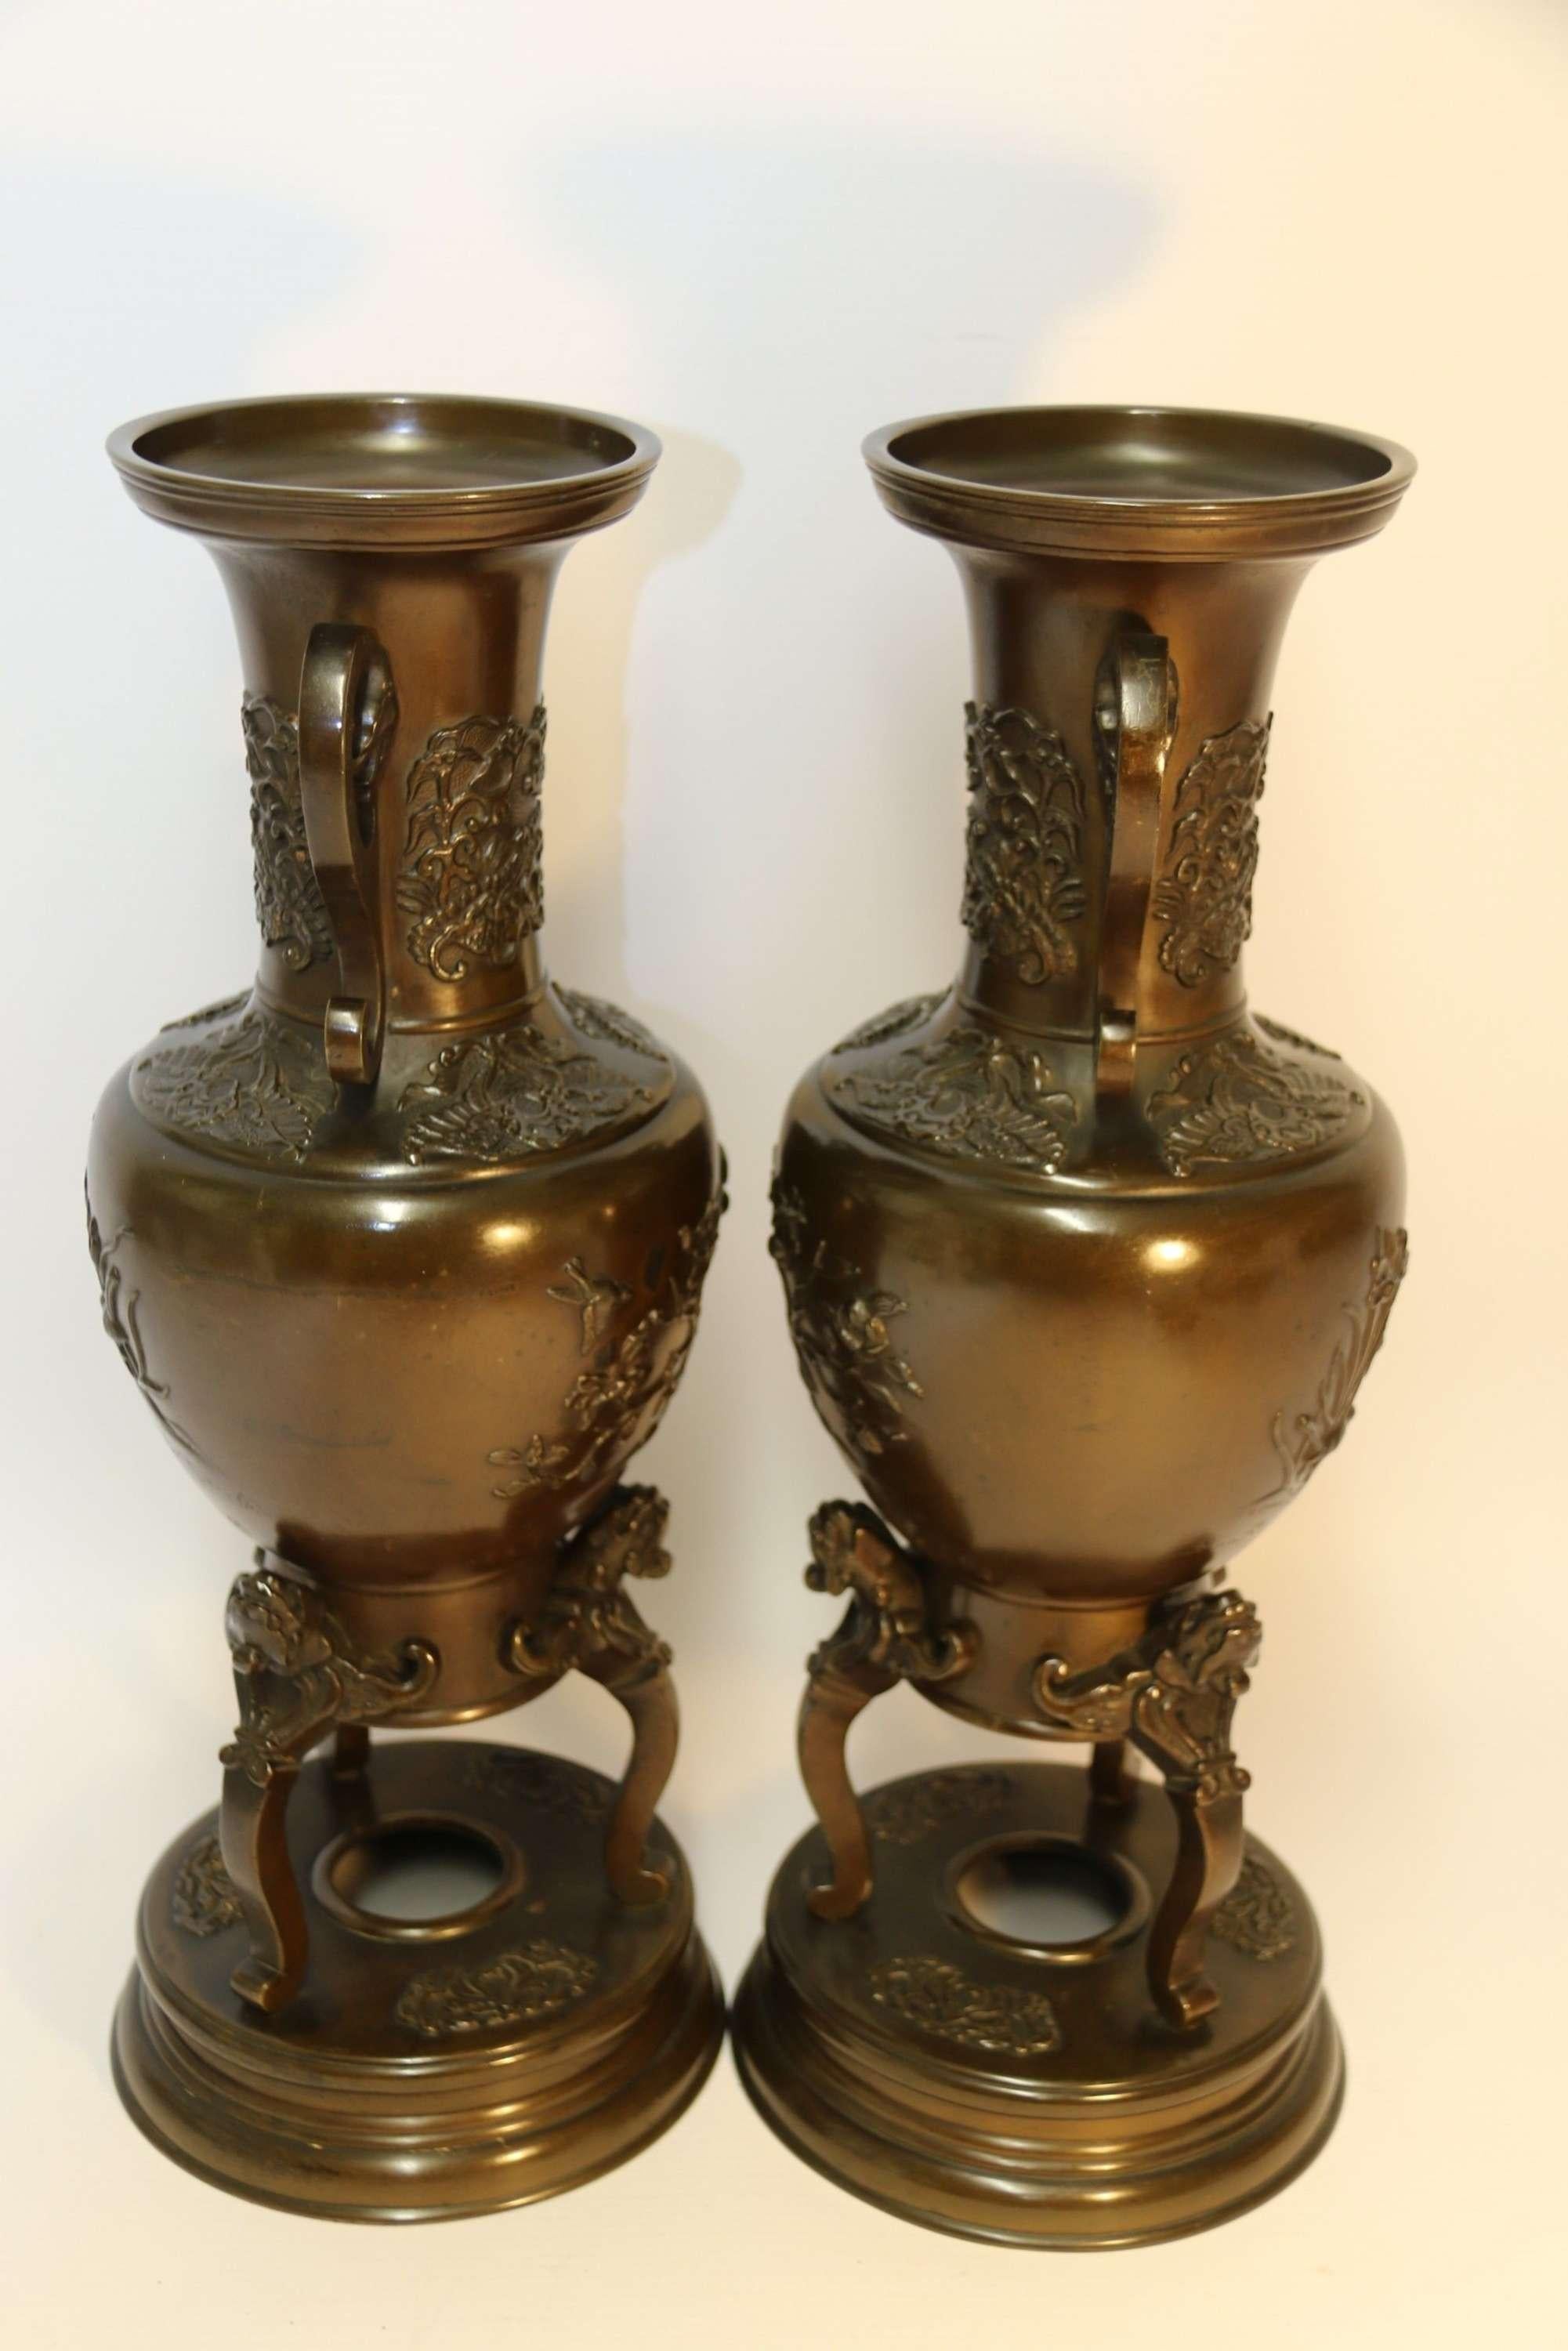 A pair of Meiji Period Japanese bronze vases.

This fine pair of late 19th century Japanese bronze vases are well proportioned and of a good decorative size. They are beautifully decorated with panels on one side with magpies amongst irises and